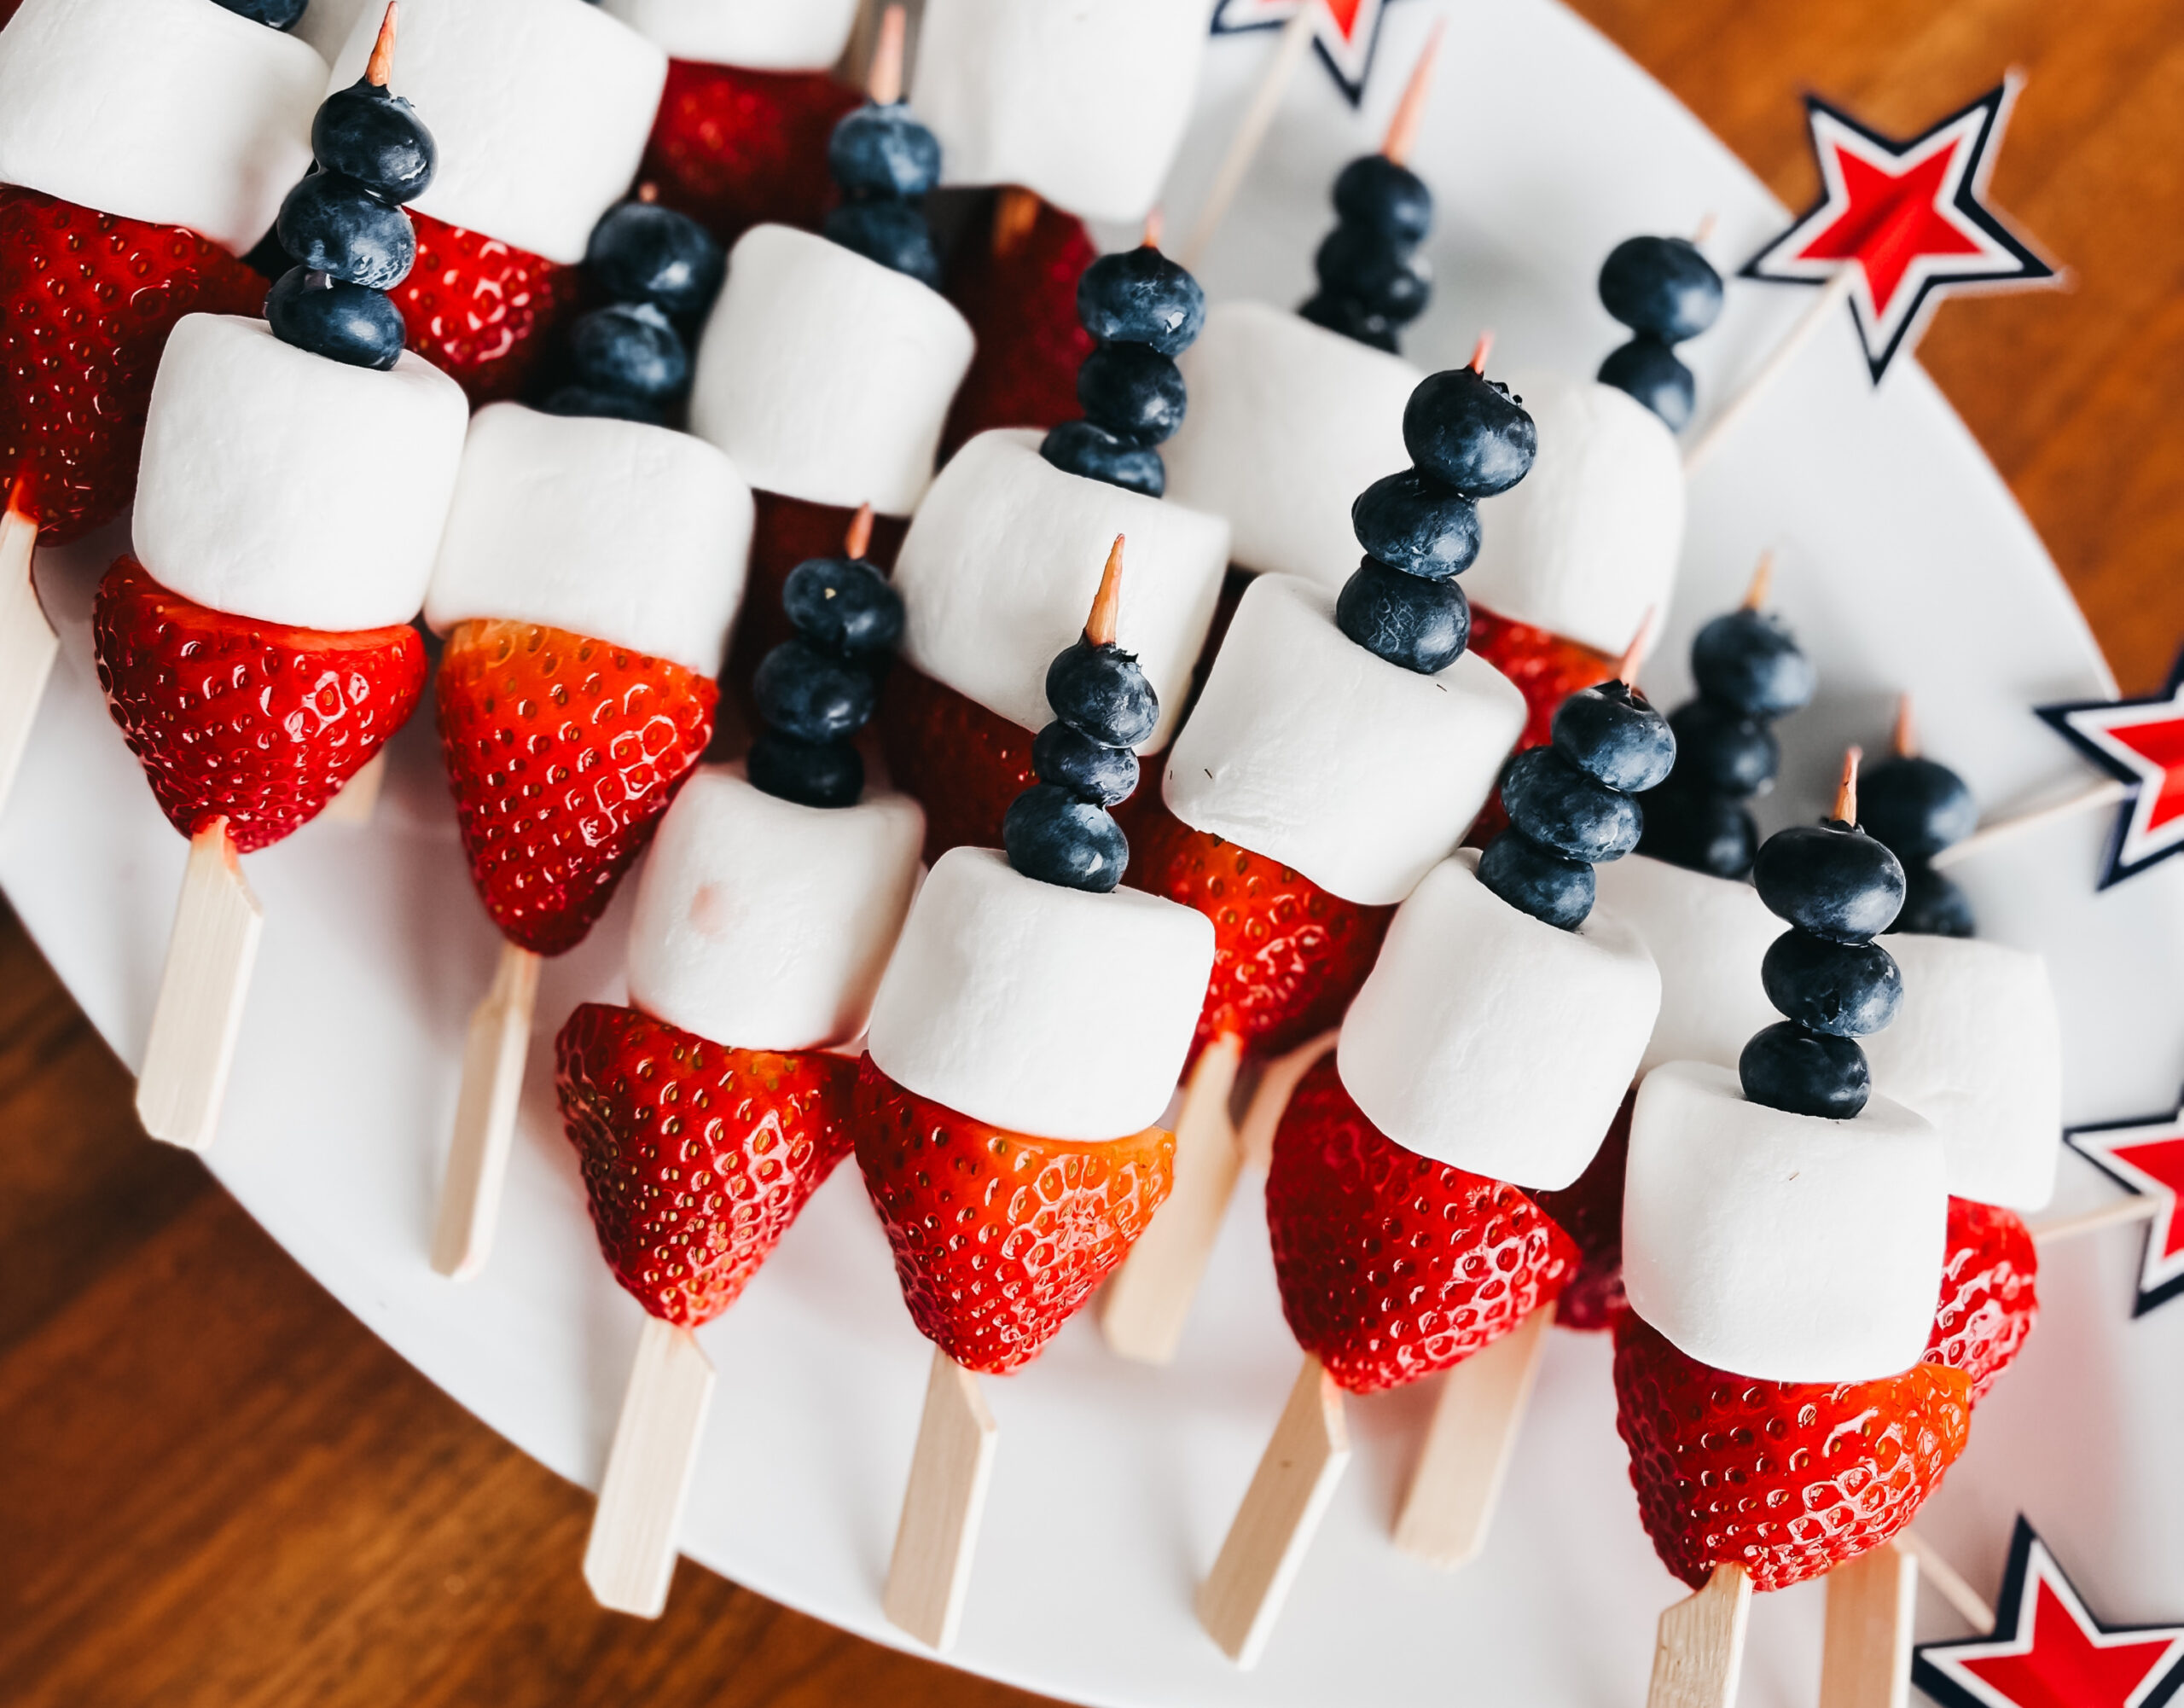 red white and blue patriotic picks - healthy-ish skewers for the 4th of July - This is our Bliss